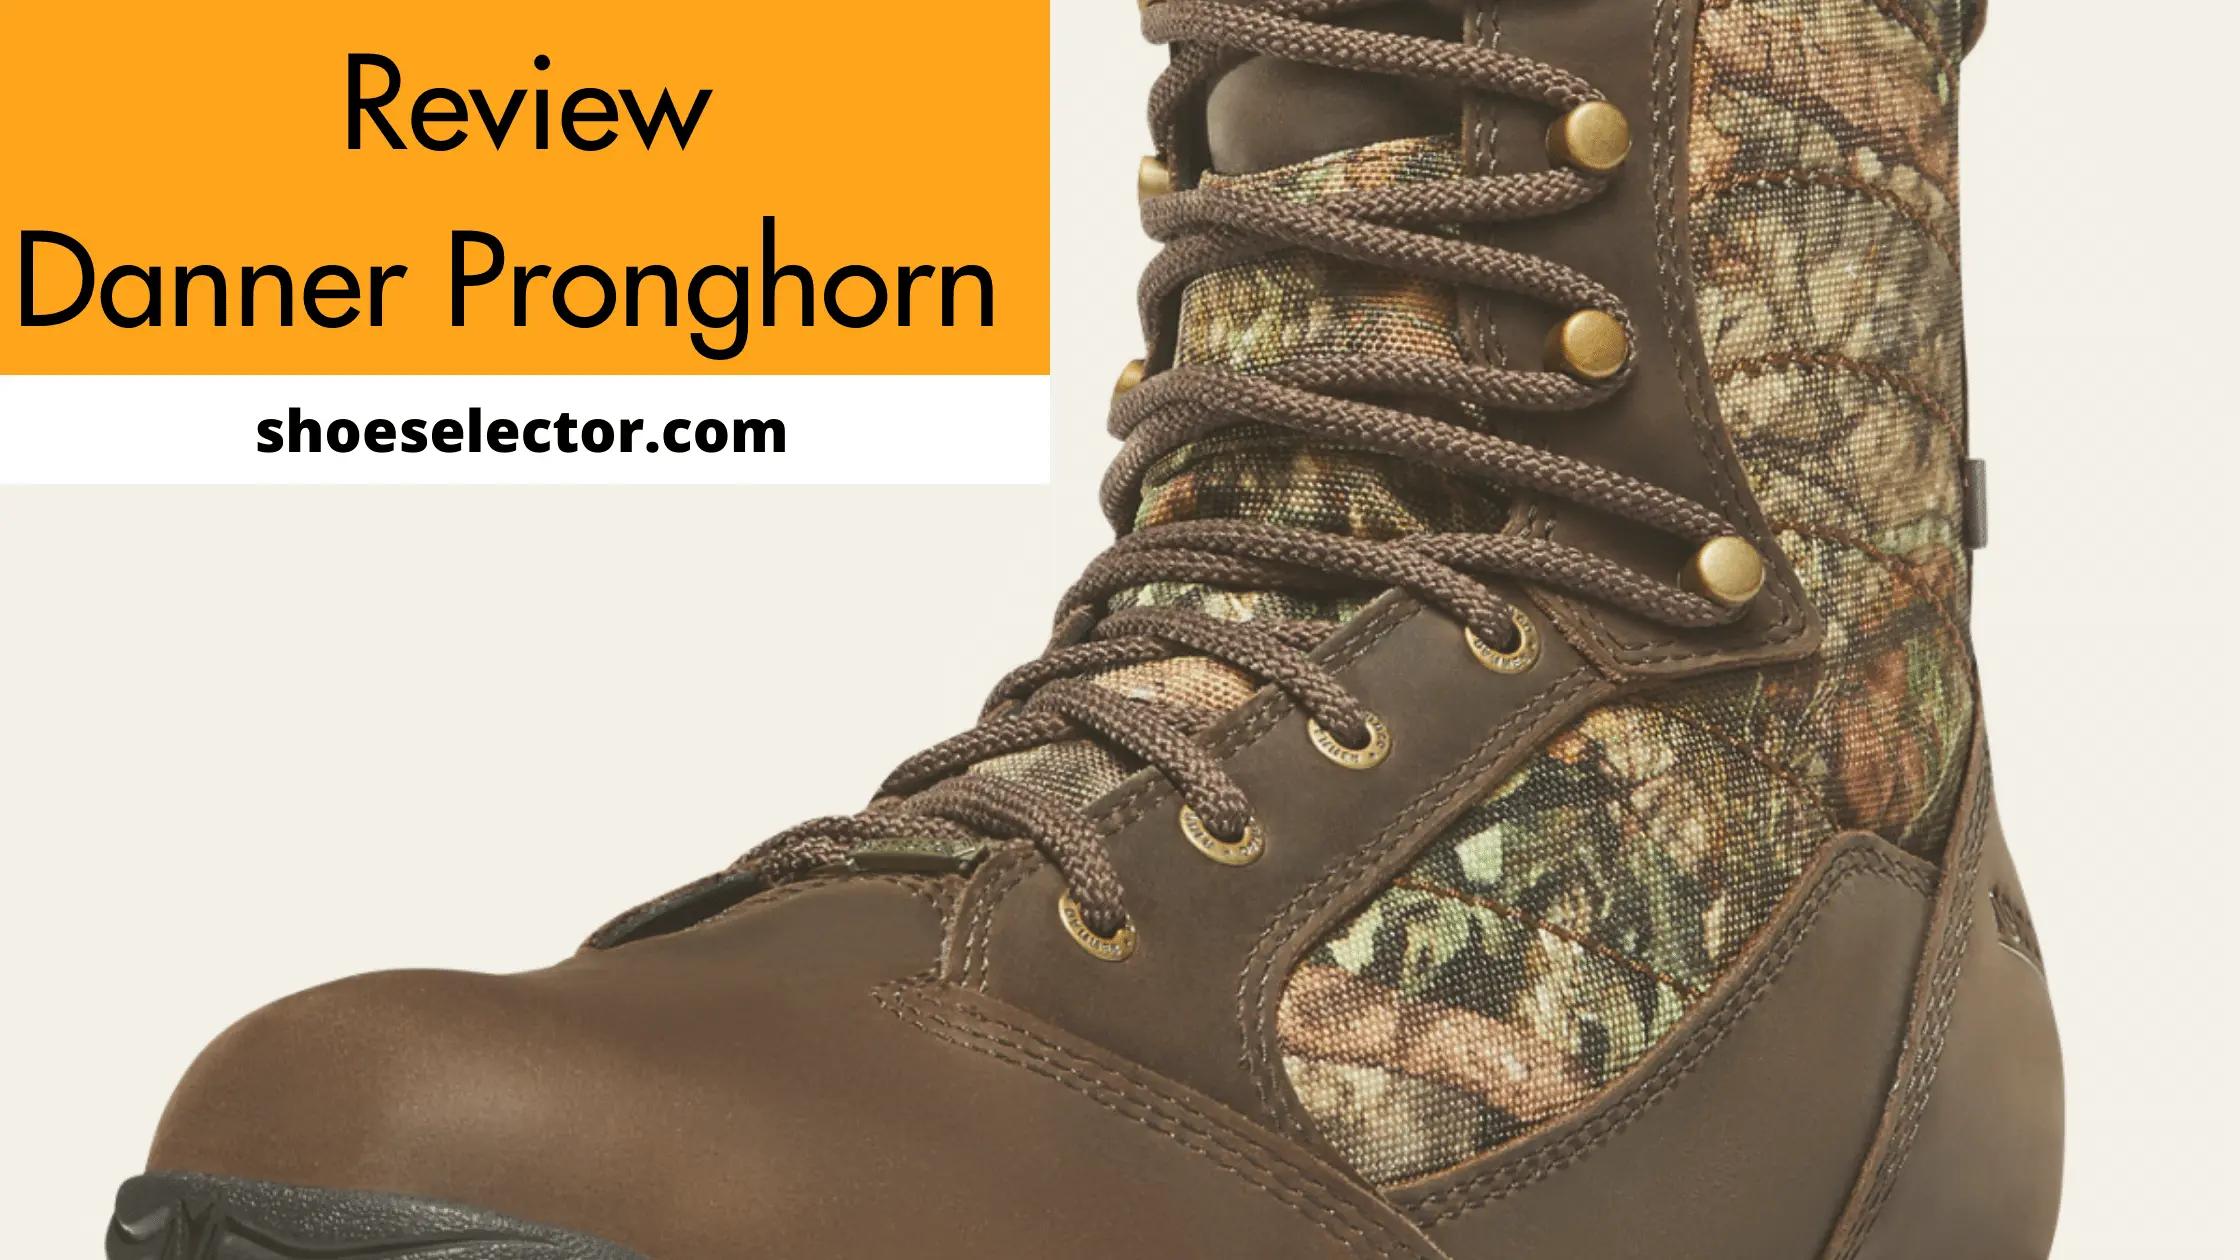 Danner Pronghorn Review With Recommended Guide